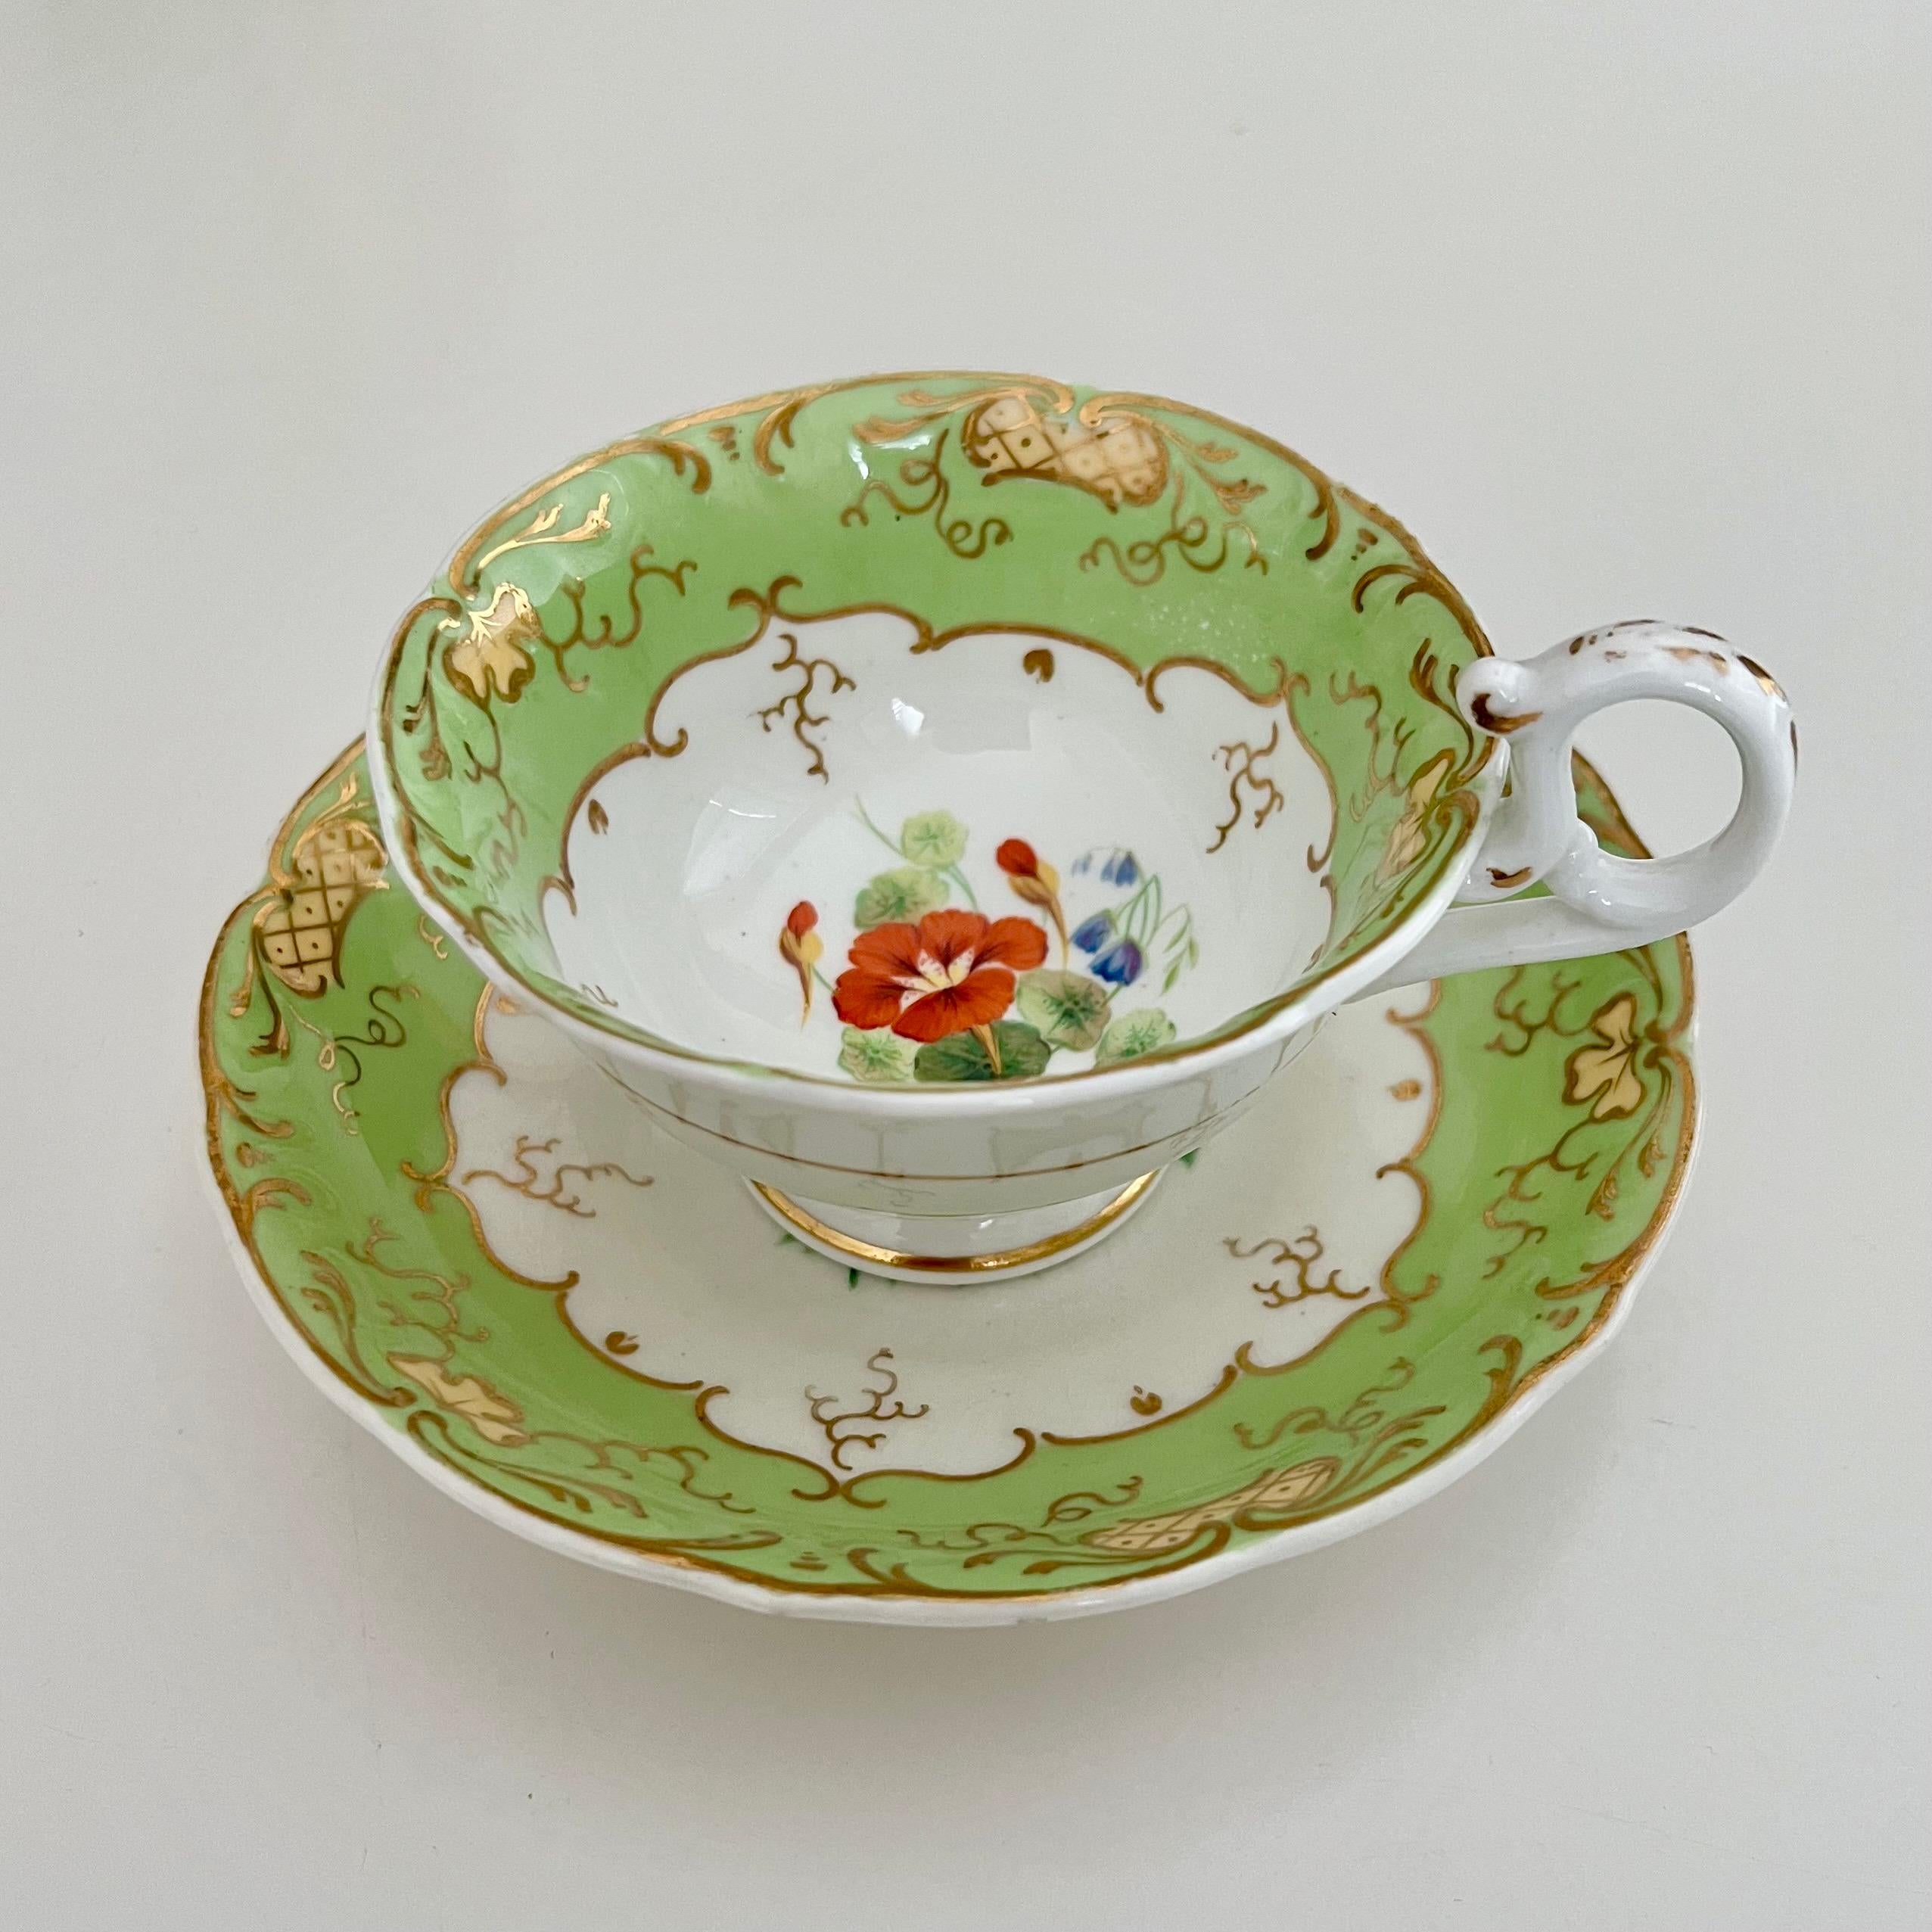 English Teacup H&R Daniel, Apple Green with Red Flowers, Rococo Revival, circa 1840